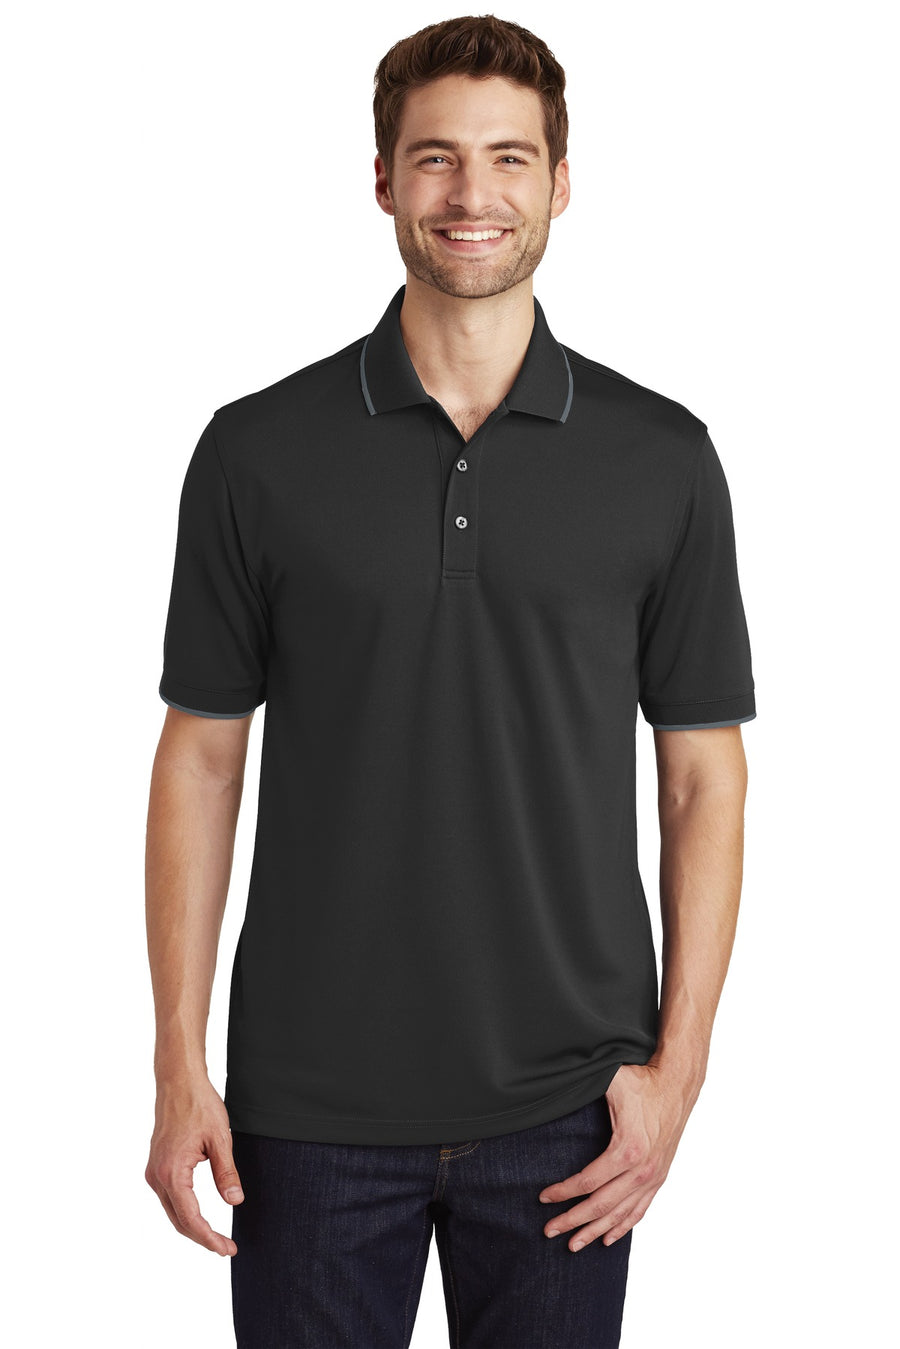 Port Authority Dry Zone UV Micro-Mesh Tipped Polo.